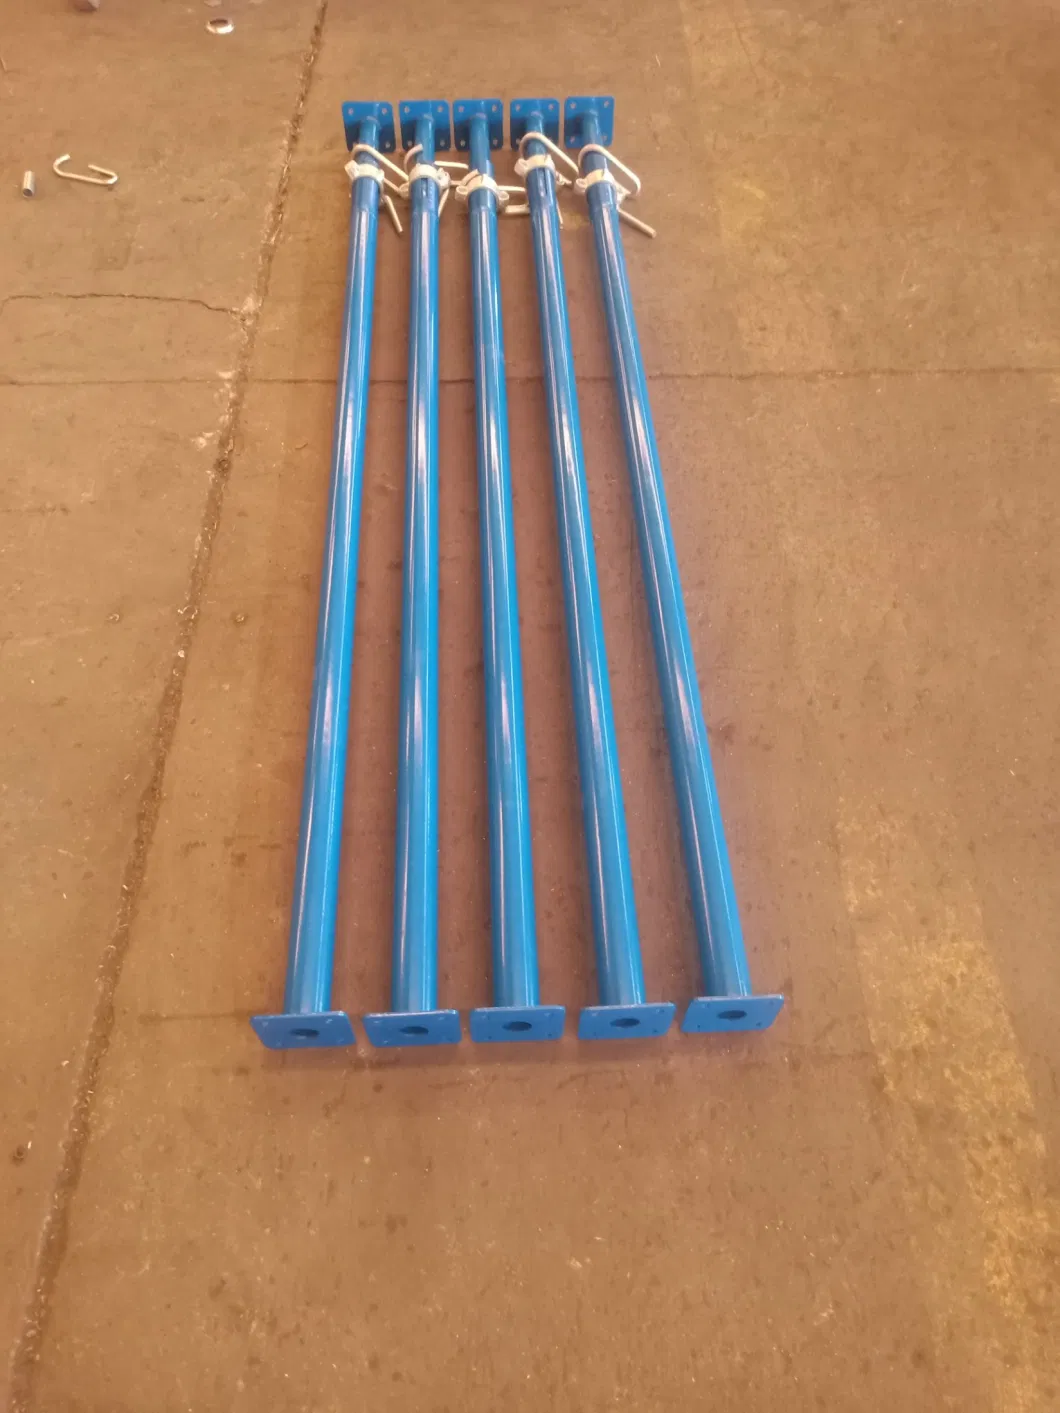 Galvanized Steel Shoring Prop Fork Head U Head Jack for Scaffolding Supporting Beam